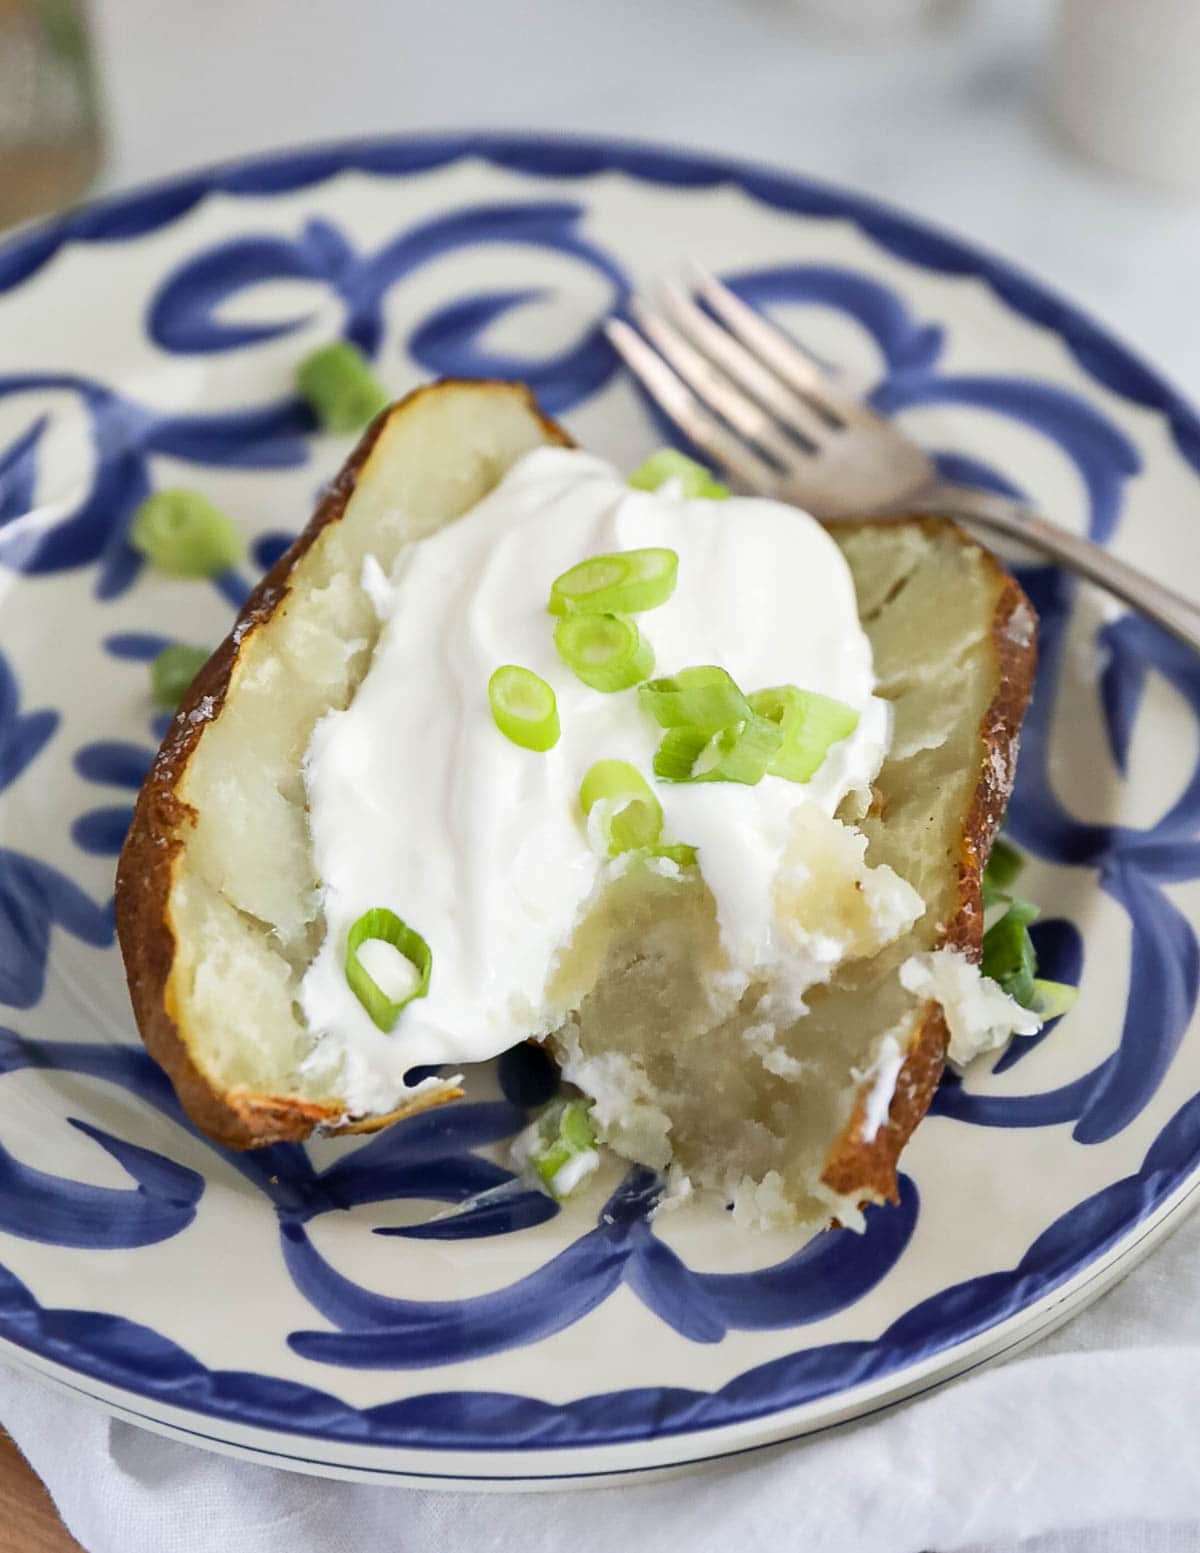 A baked potato on a blue and white plate. The potato is sliced in half, there is a dollop of sour cream and sliced scallions inside the potato, and a fork next to the potato.